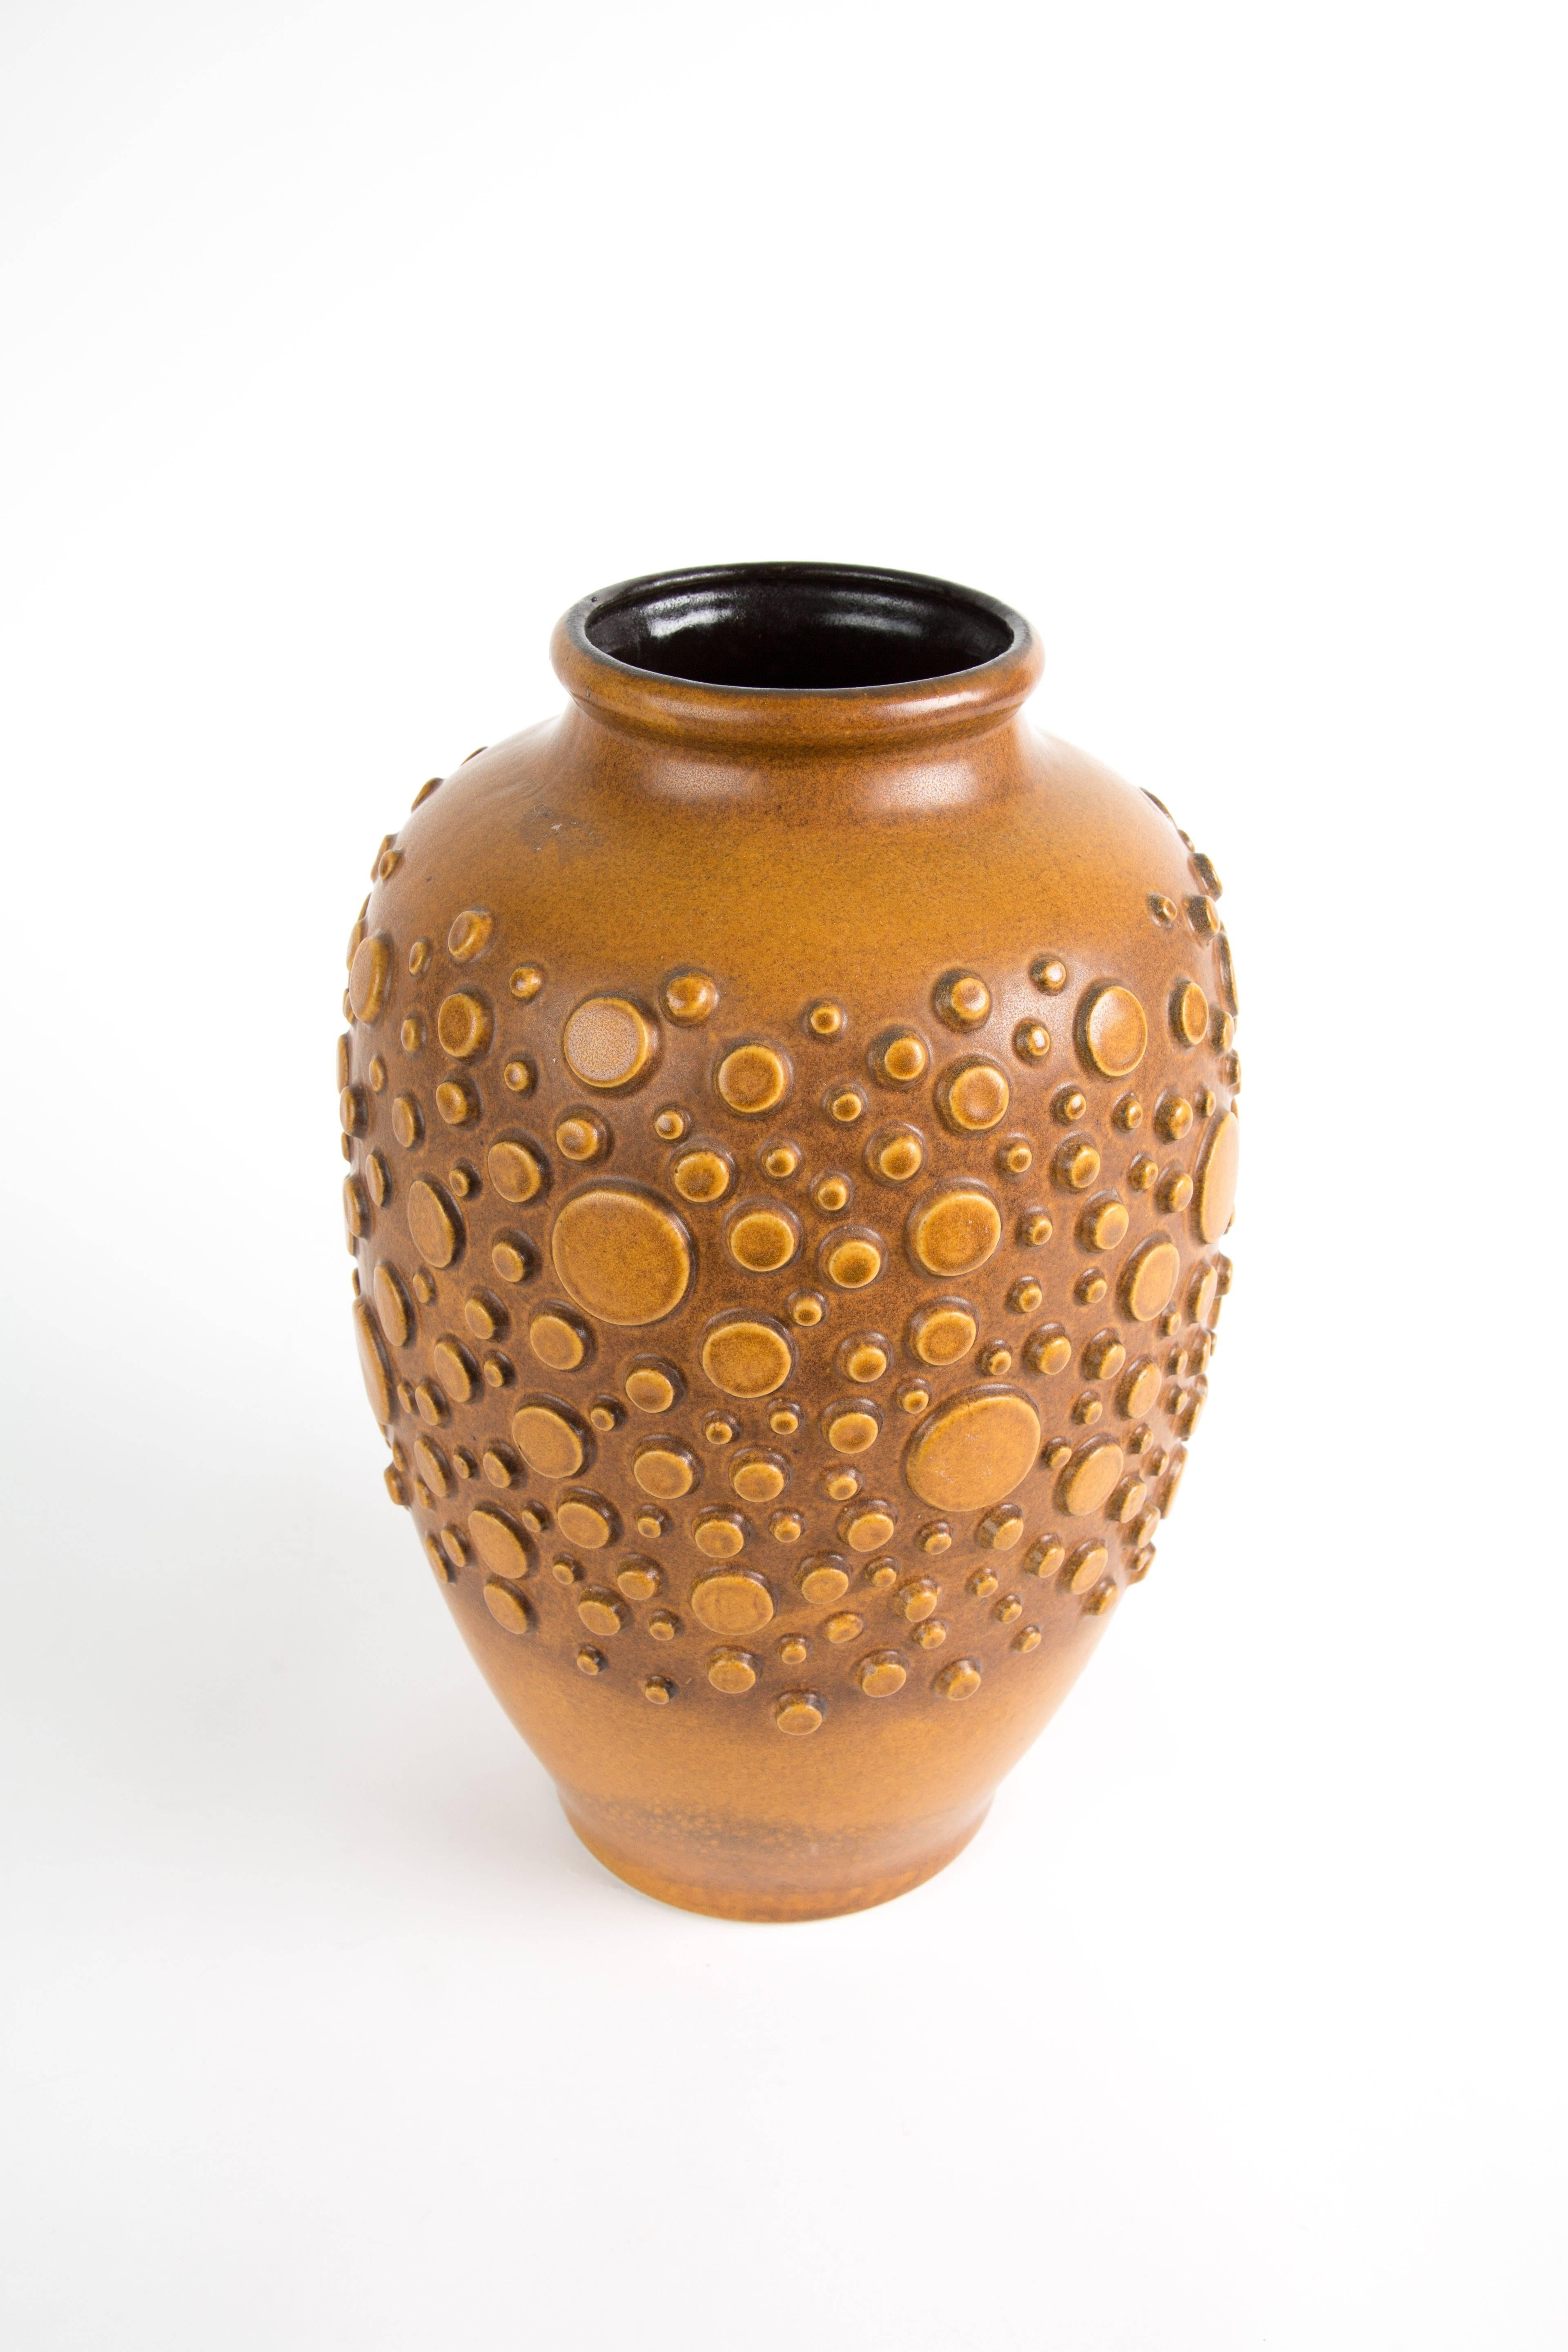 HUGE BRUTALIST  polka dot vase. Powerful formed vase. The color of the polka dots are in nice contrast with the back brown color.